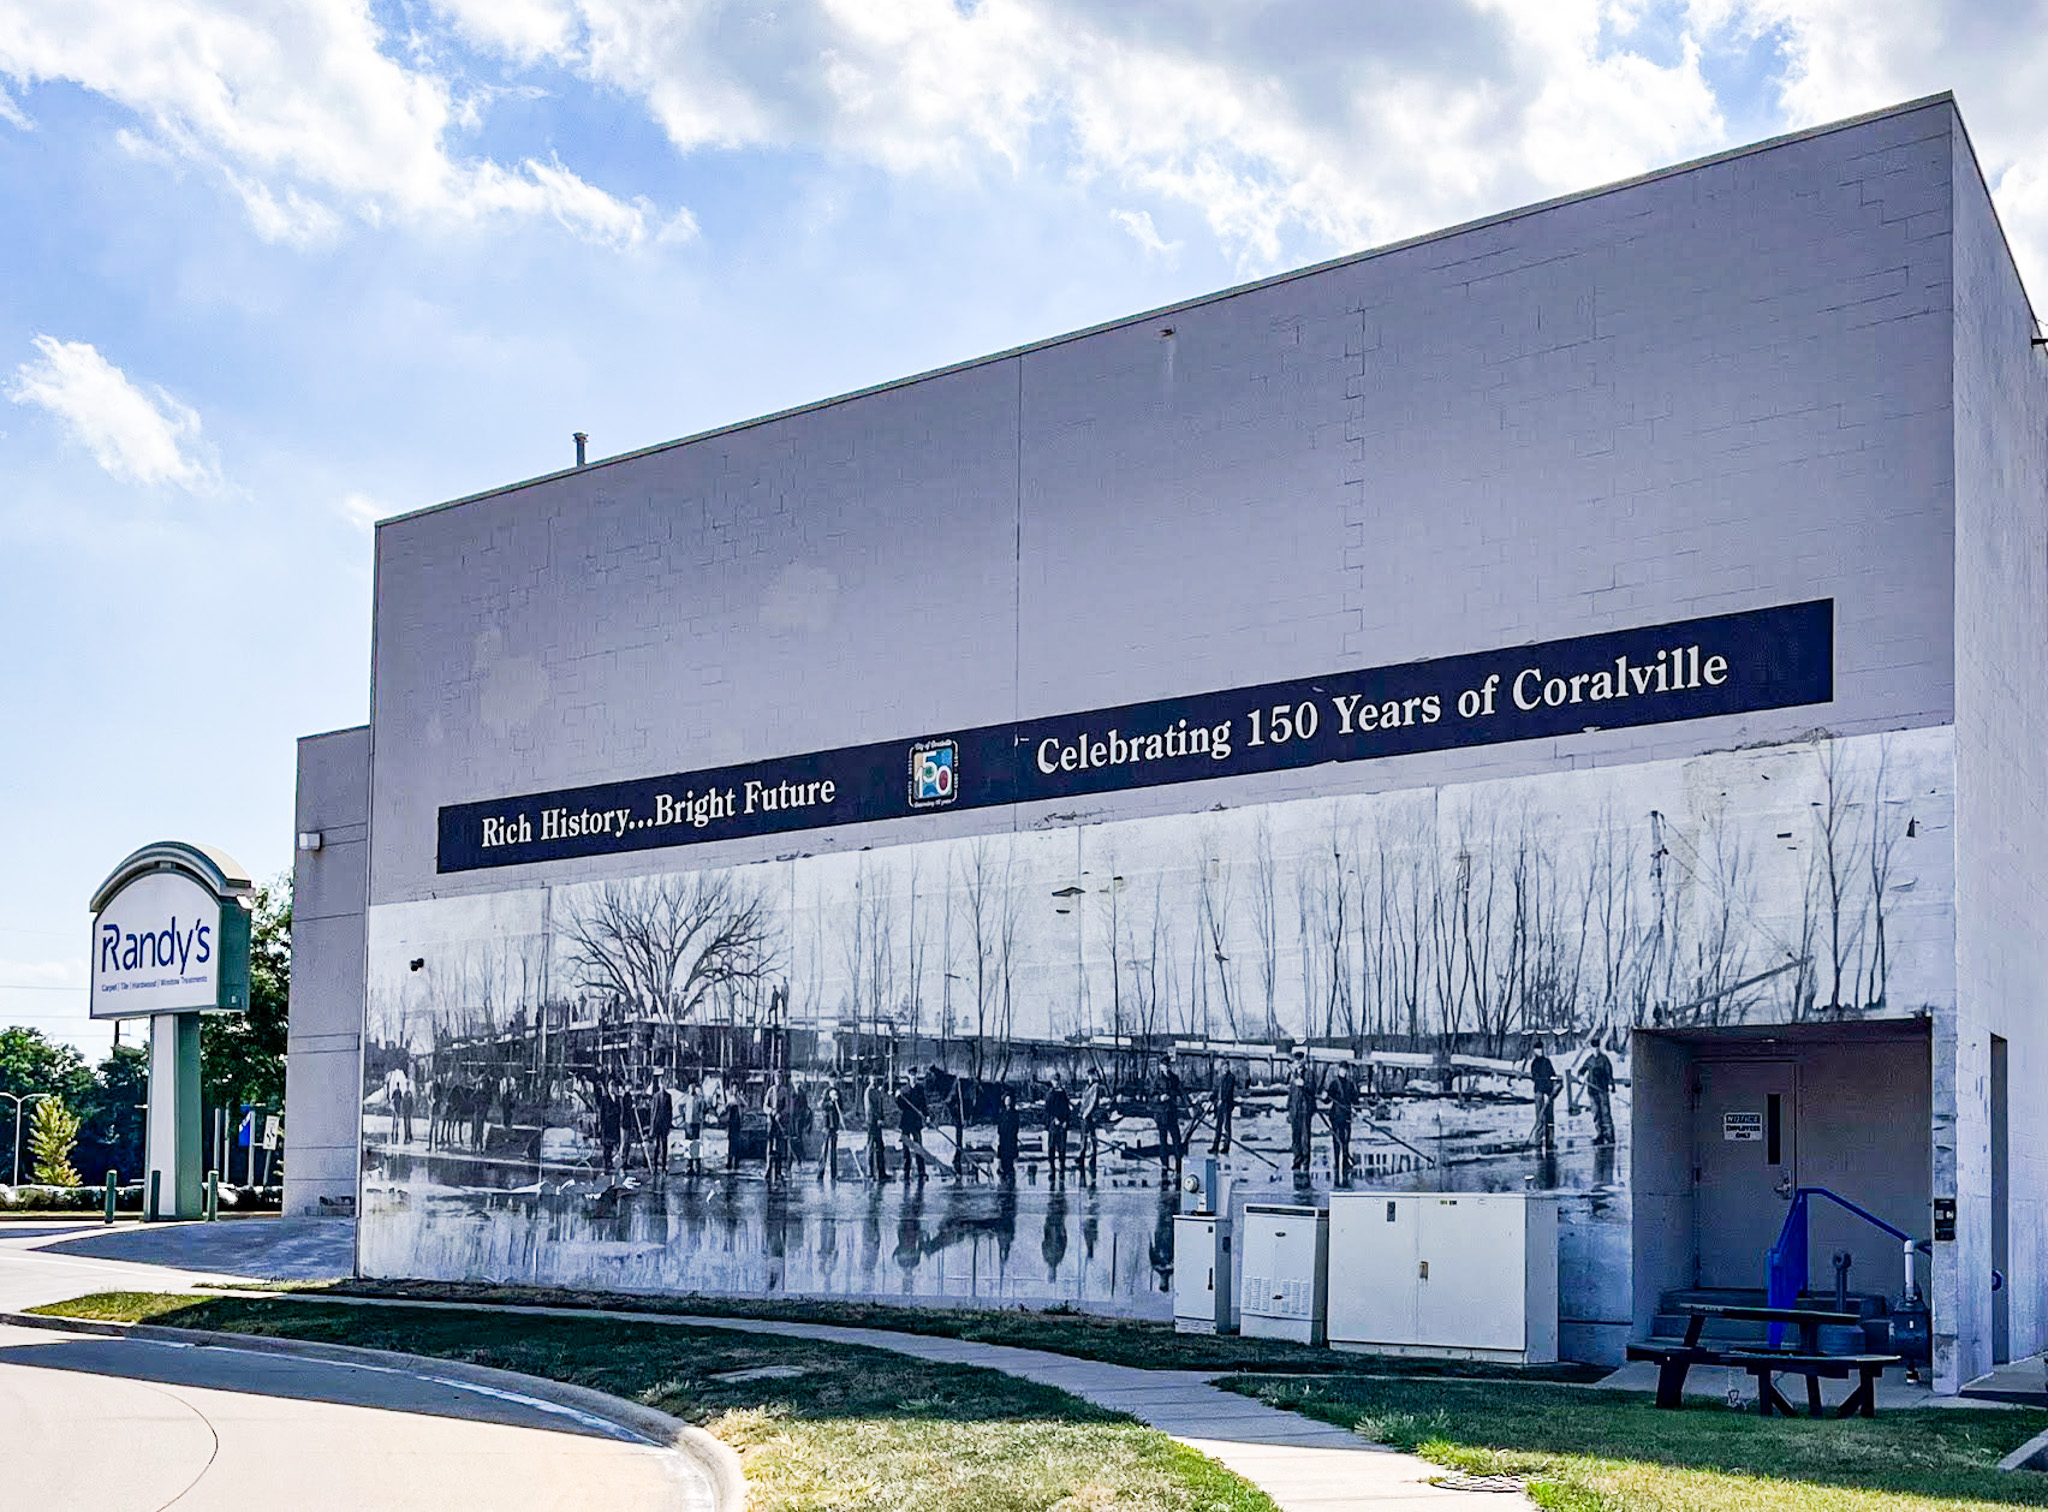 A mural commemorating the 150th anniversary of Coralville is seen on the side of Randy’s Flooring at 401 Second St. on July 26. CREDIT ELEANOR HILDEBRANDT